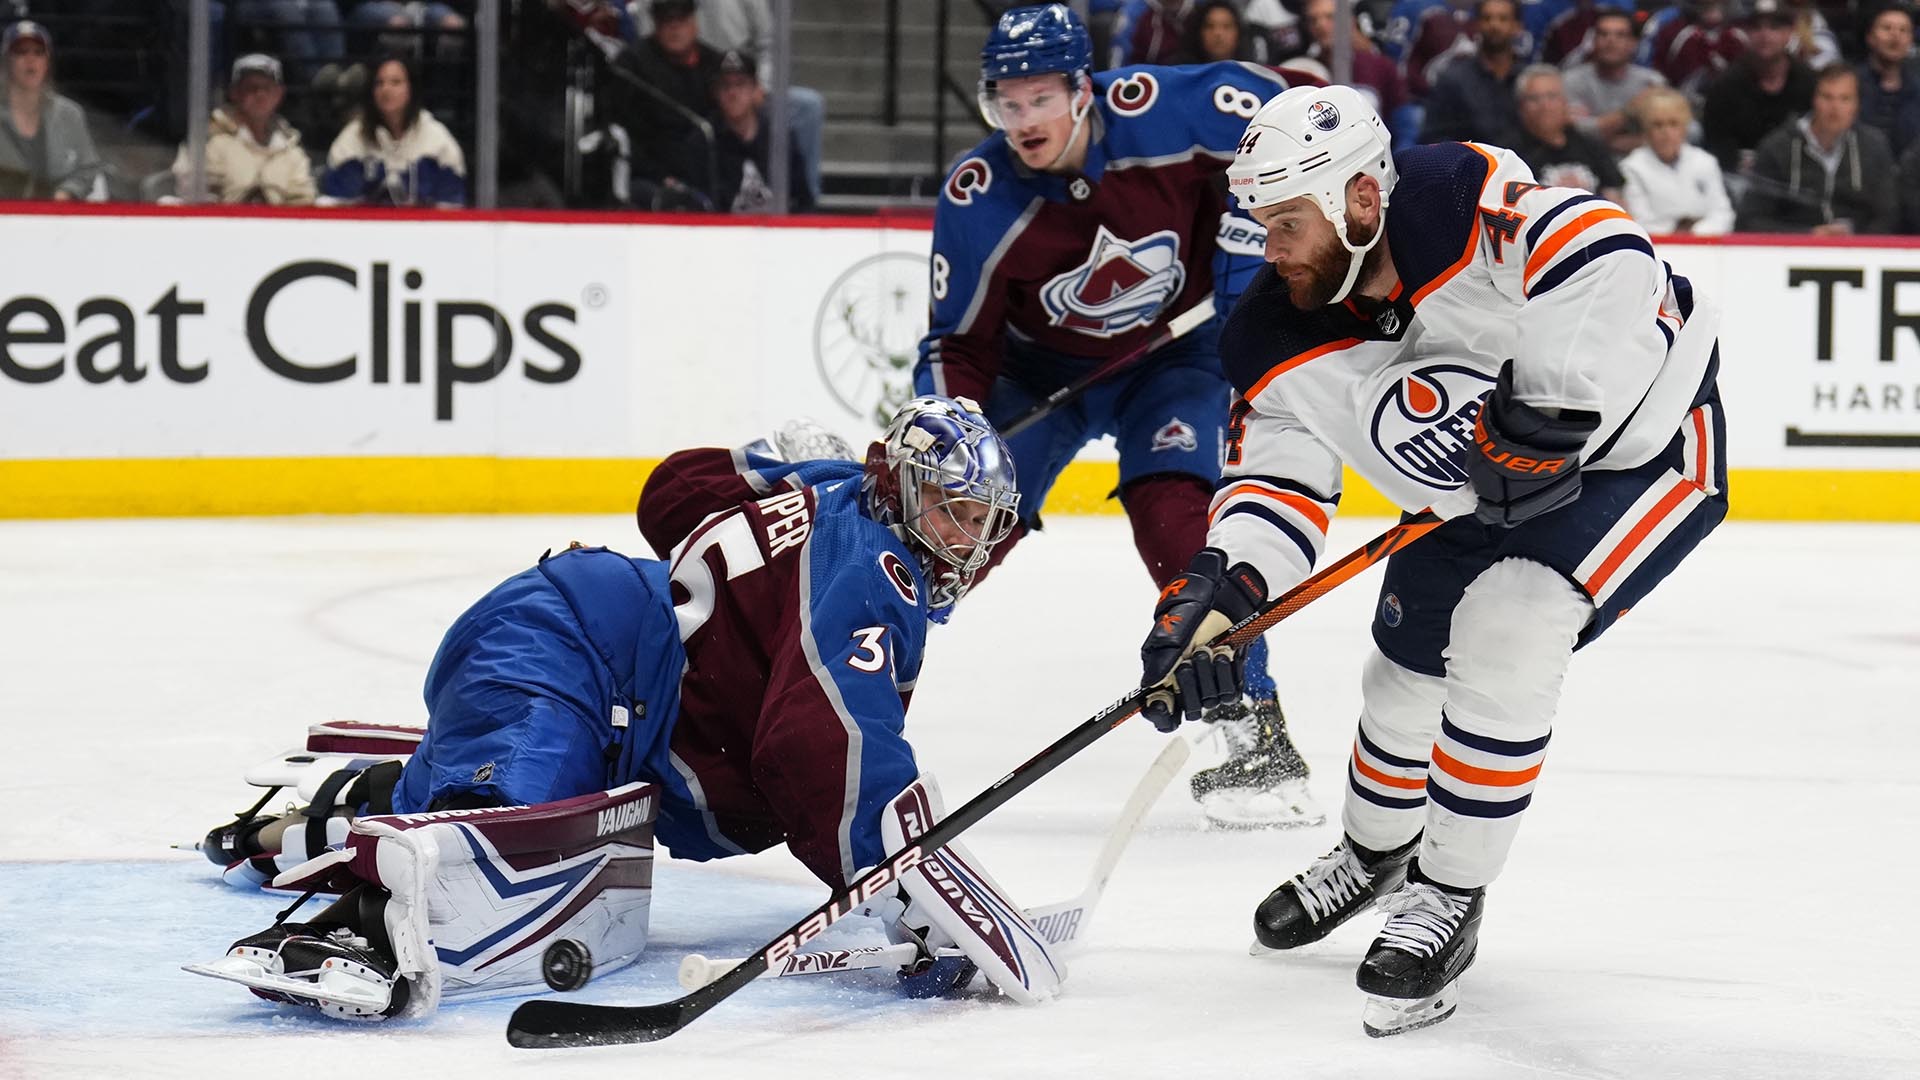 Oilers' Kassian suspended seven games - NBC Sports